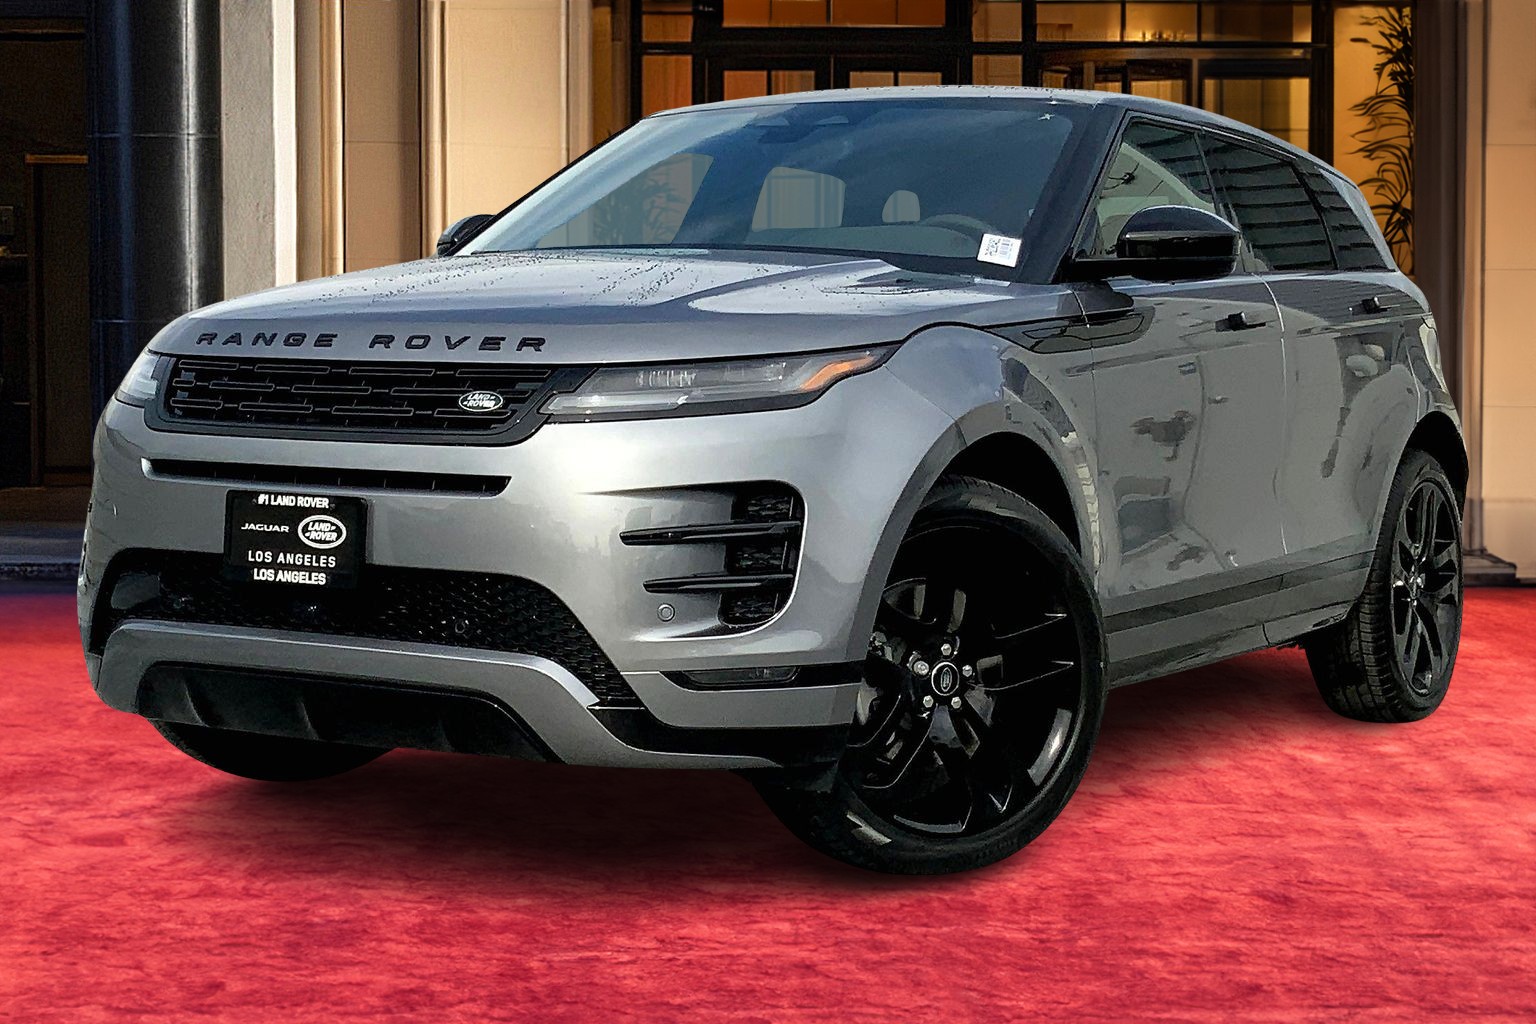 2019 Land Rover Range Rover Evoque - News, reviews, picture galleries and  videos - The Car Guide